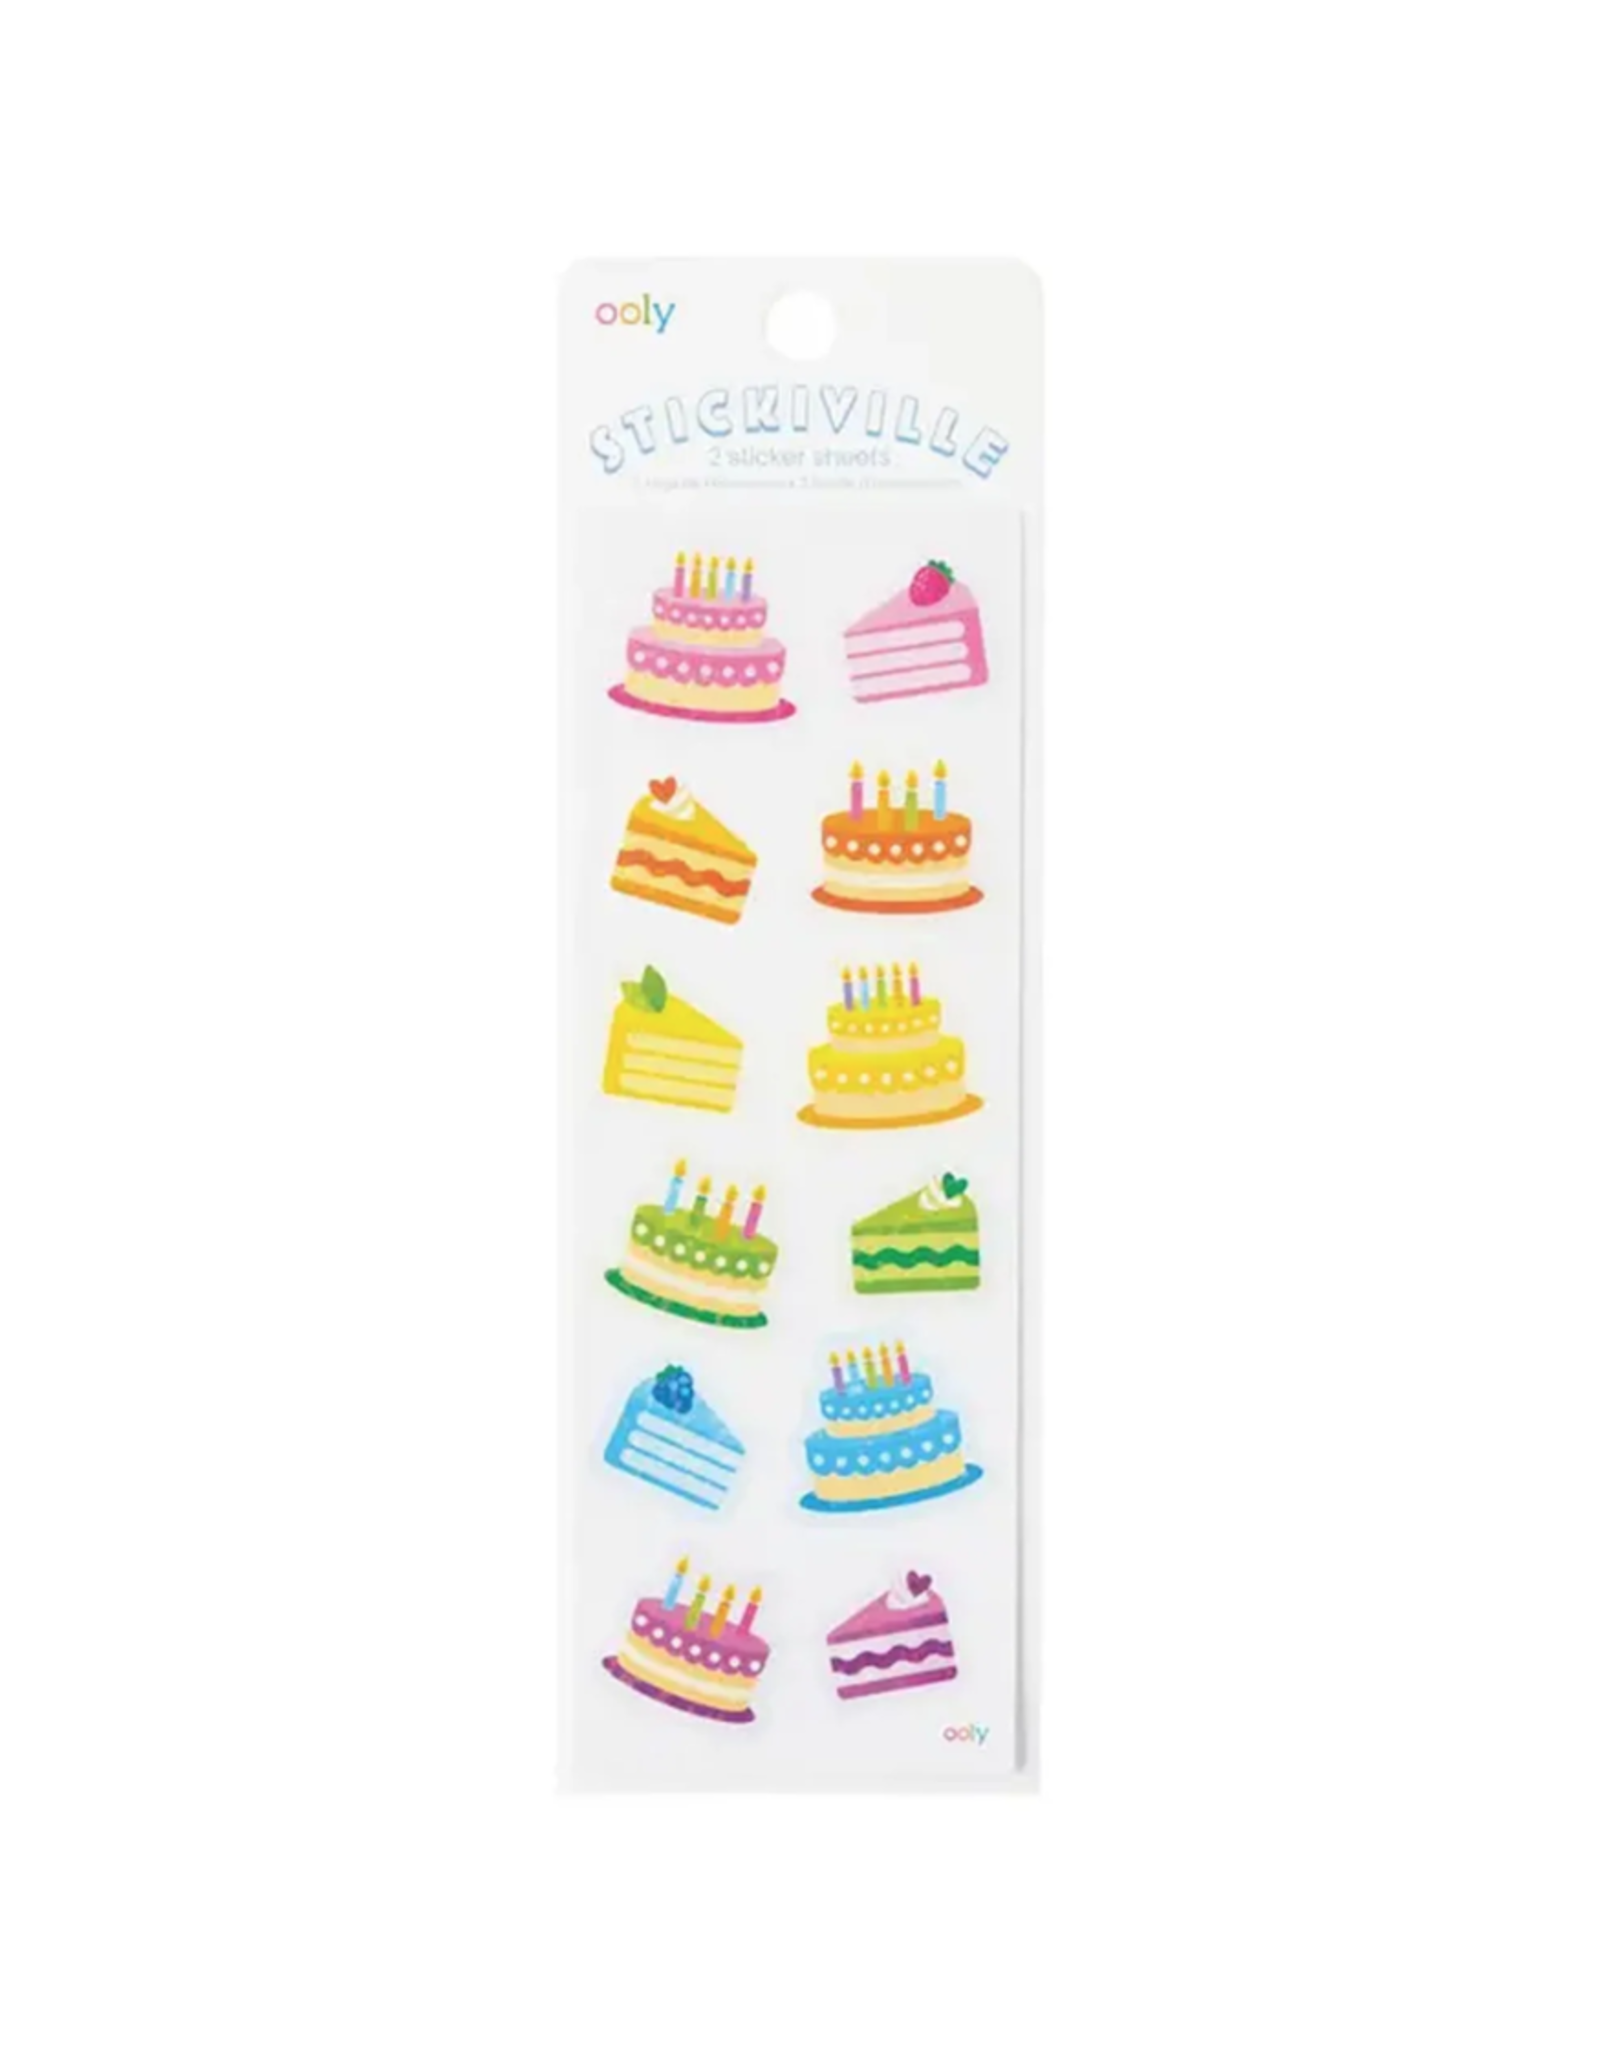 Ooly Stickiville Birthday Cakes Stickers